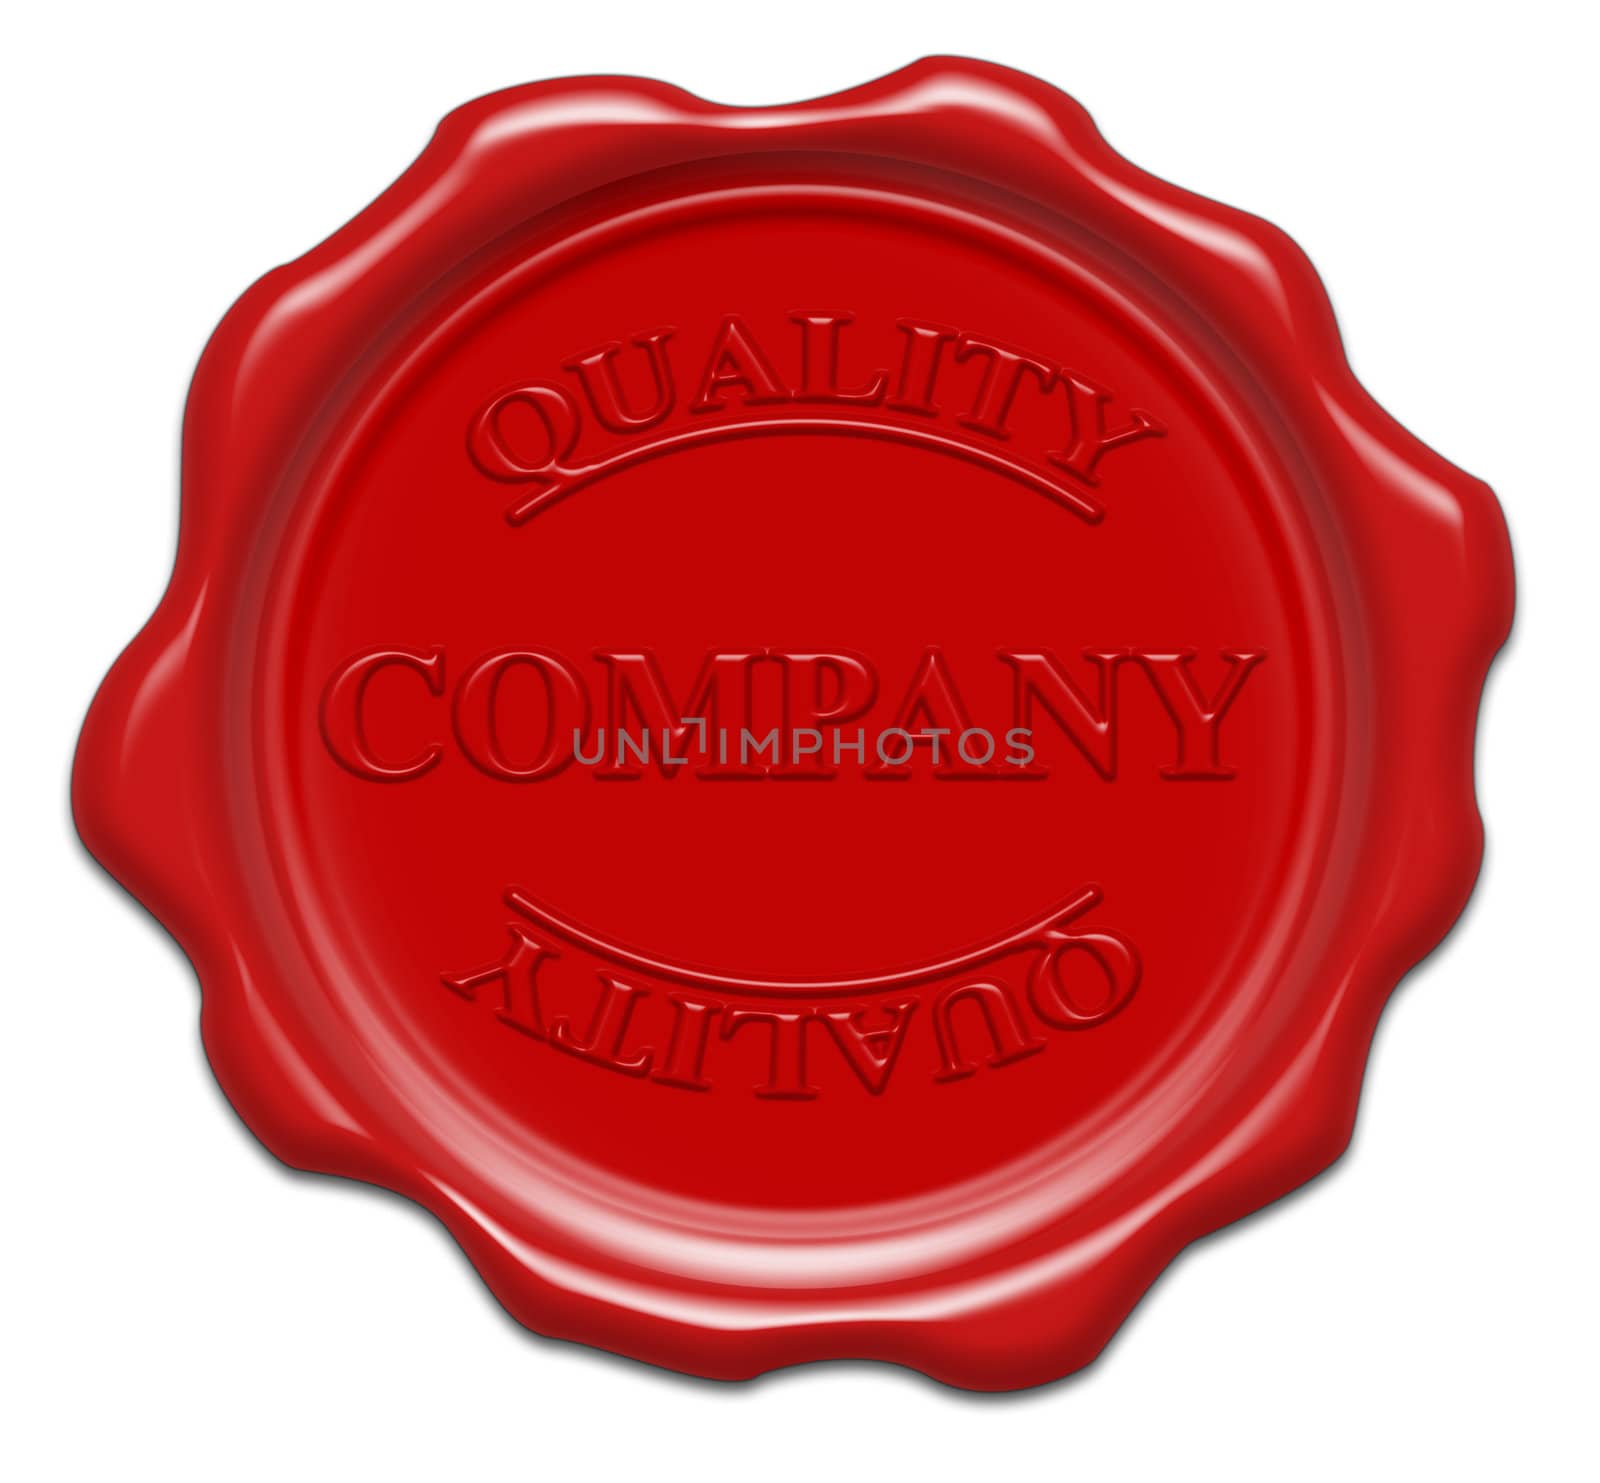 quality company - illustration red wax seal isolated on white ba by mozzyb